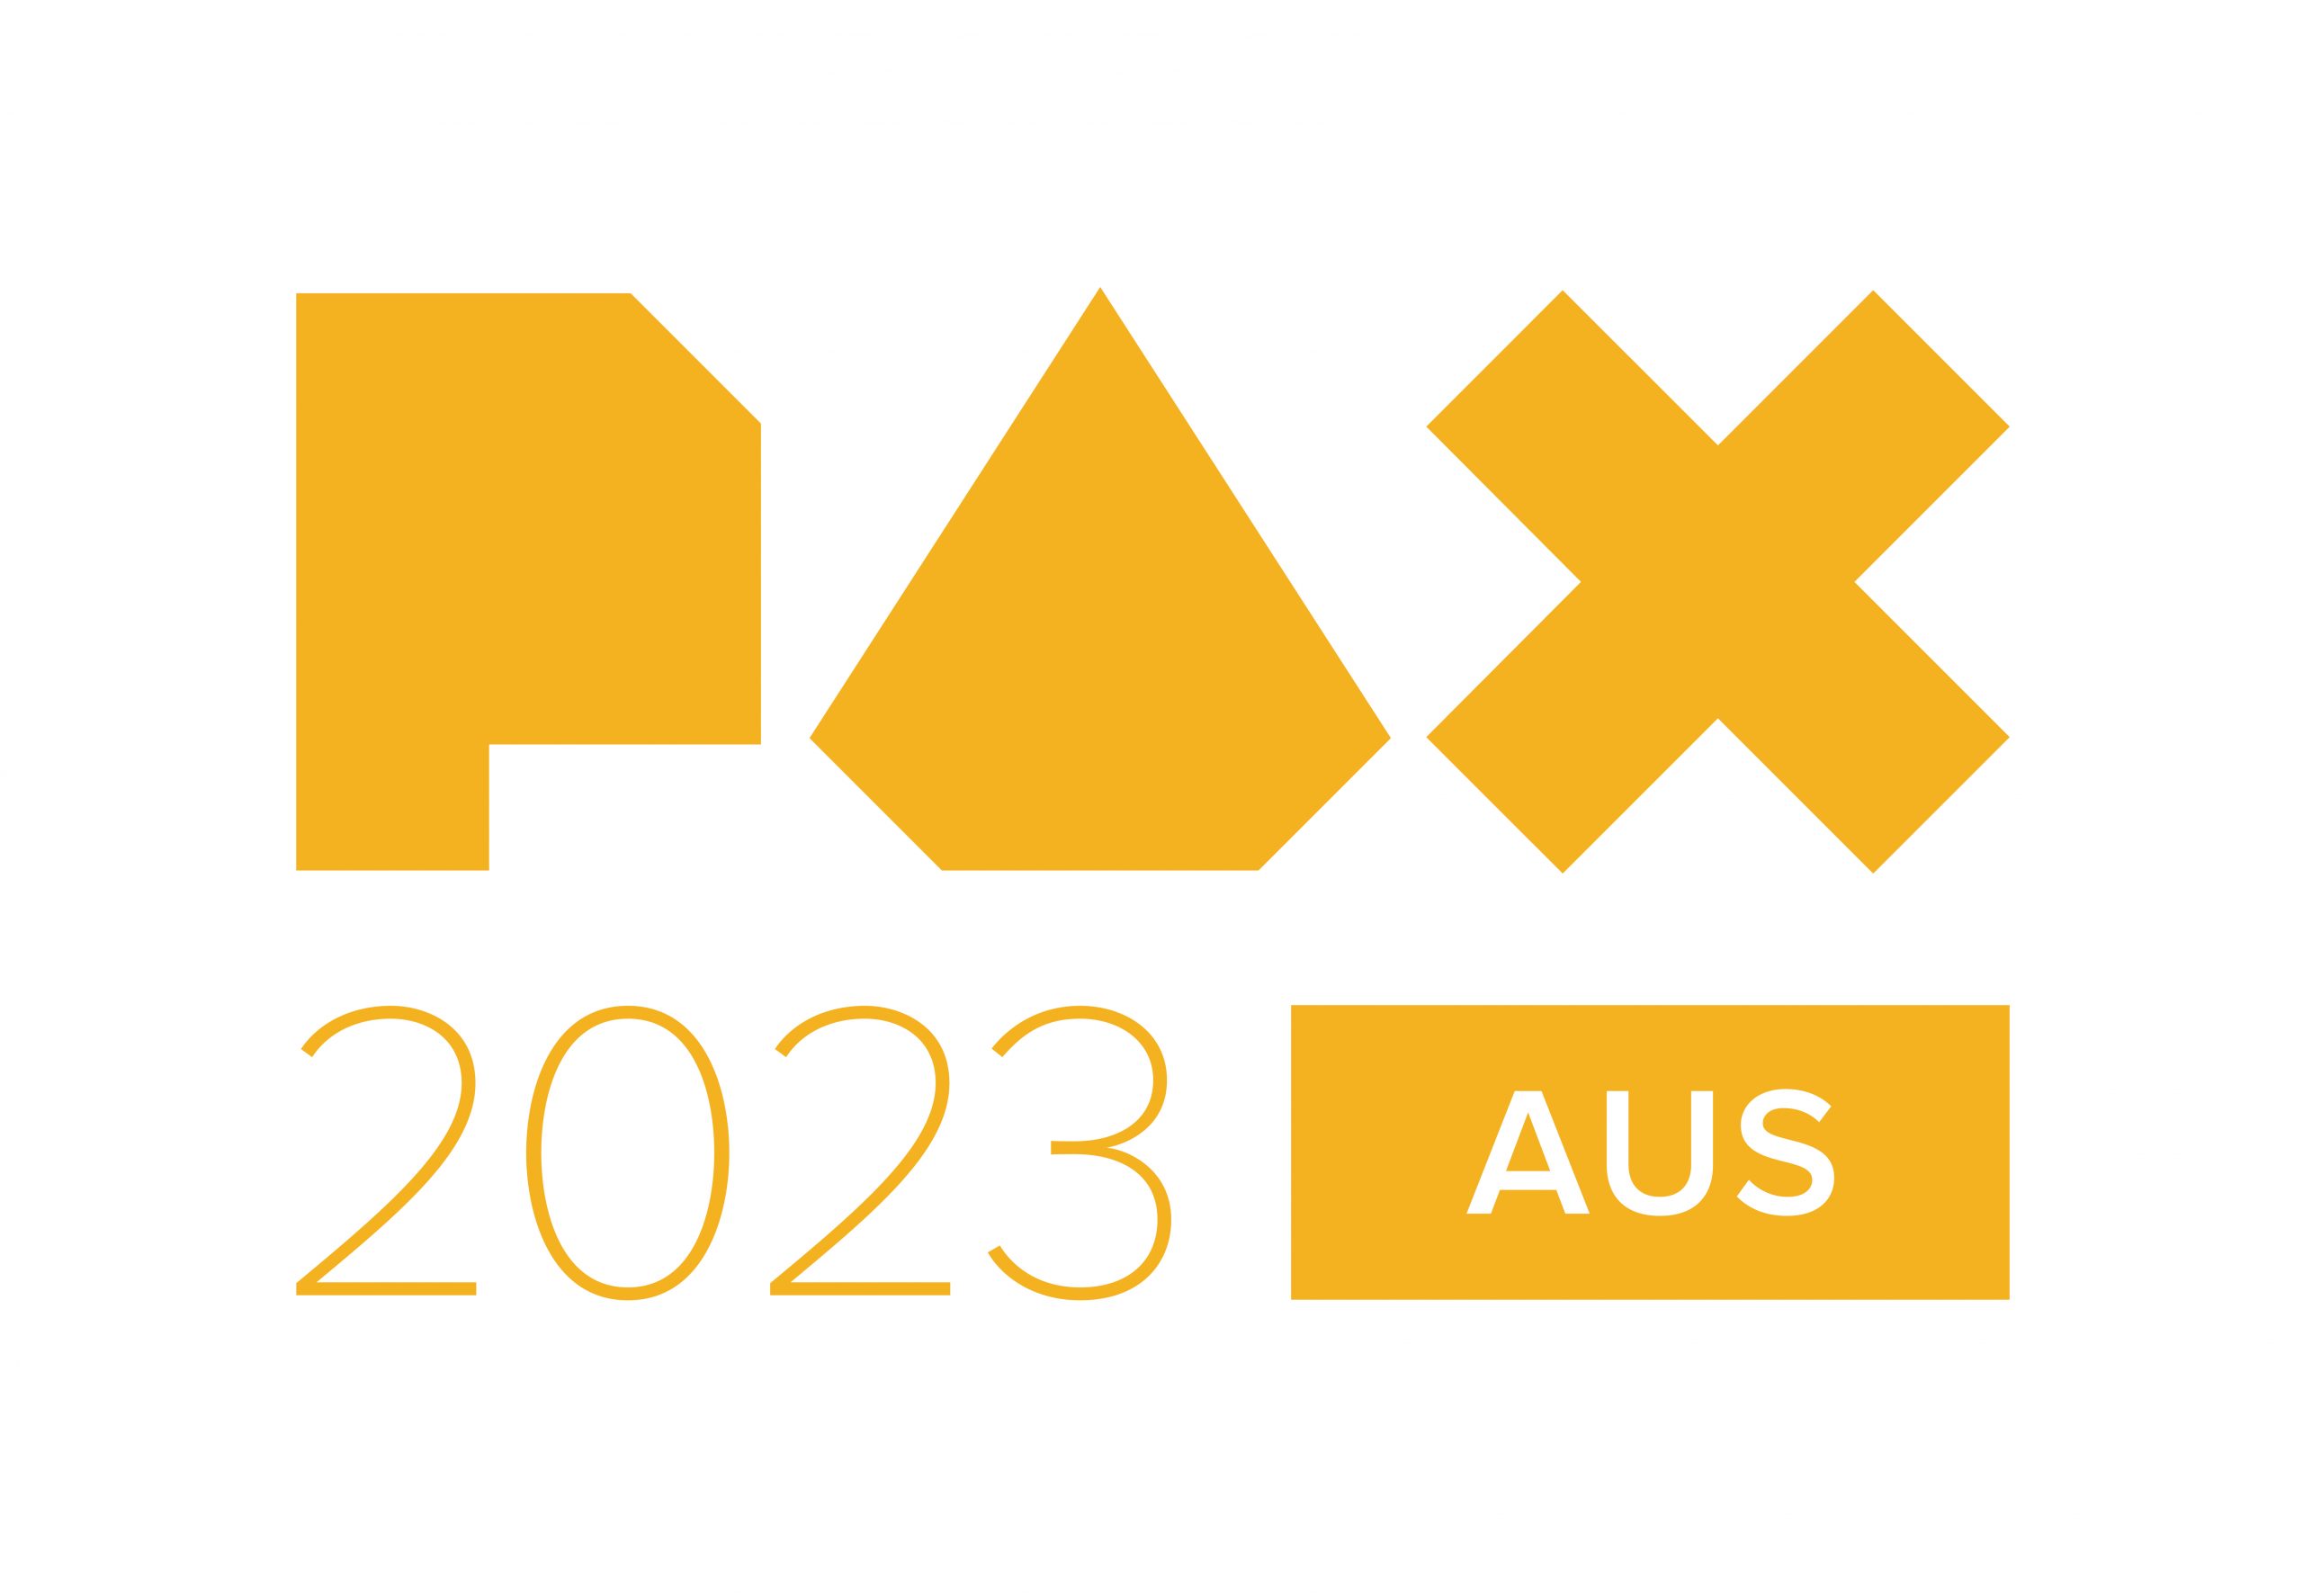 PAX Aus 2023 Early Bird Badges Go On Sale - And Are Getting Eaten Up Quickly